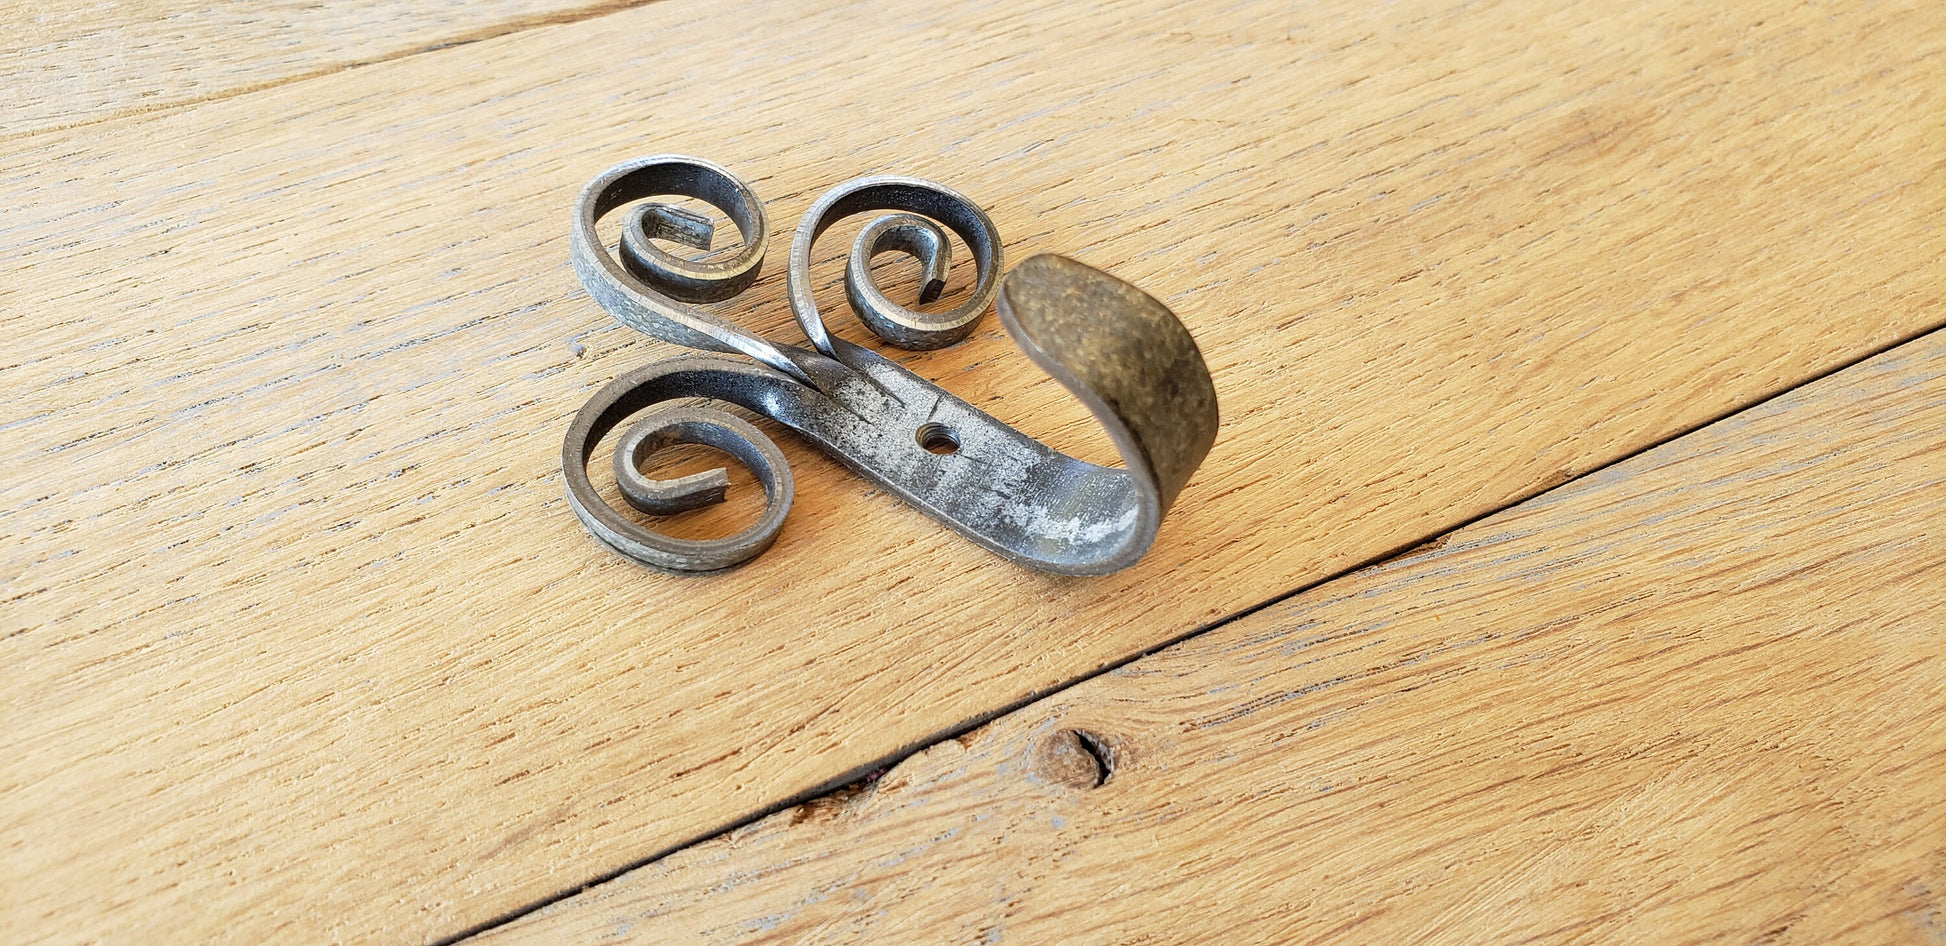 Wine Barrel Ring Wall Hooks - Florina - Set of 3 Made from retired California wine barrel rings. 100% Recycled!